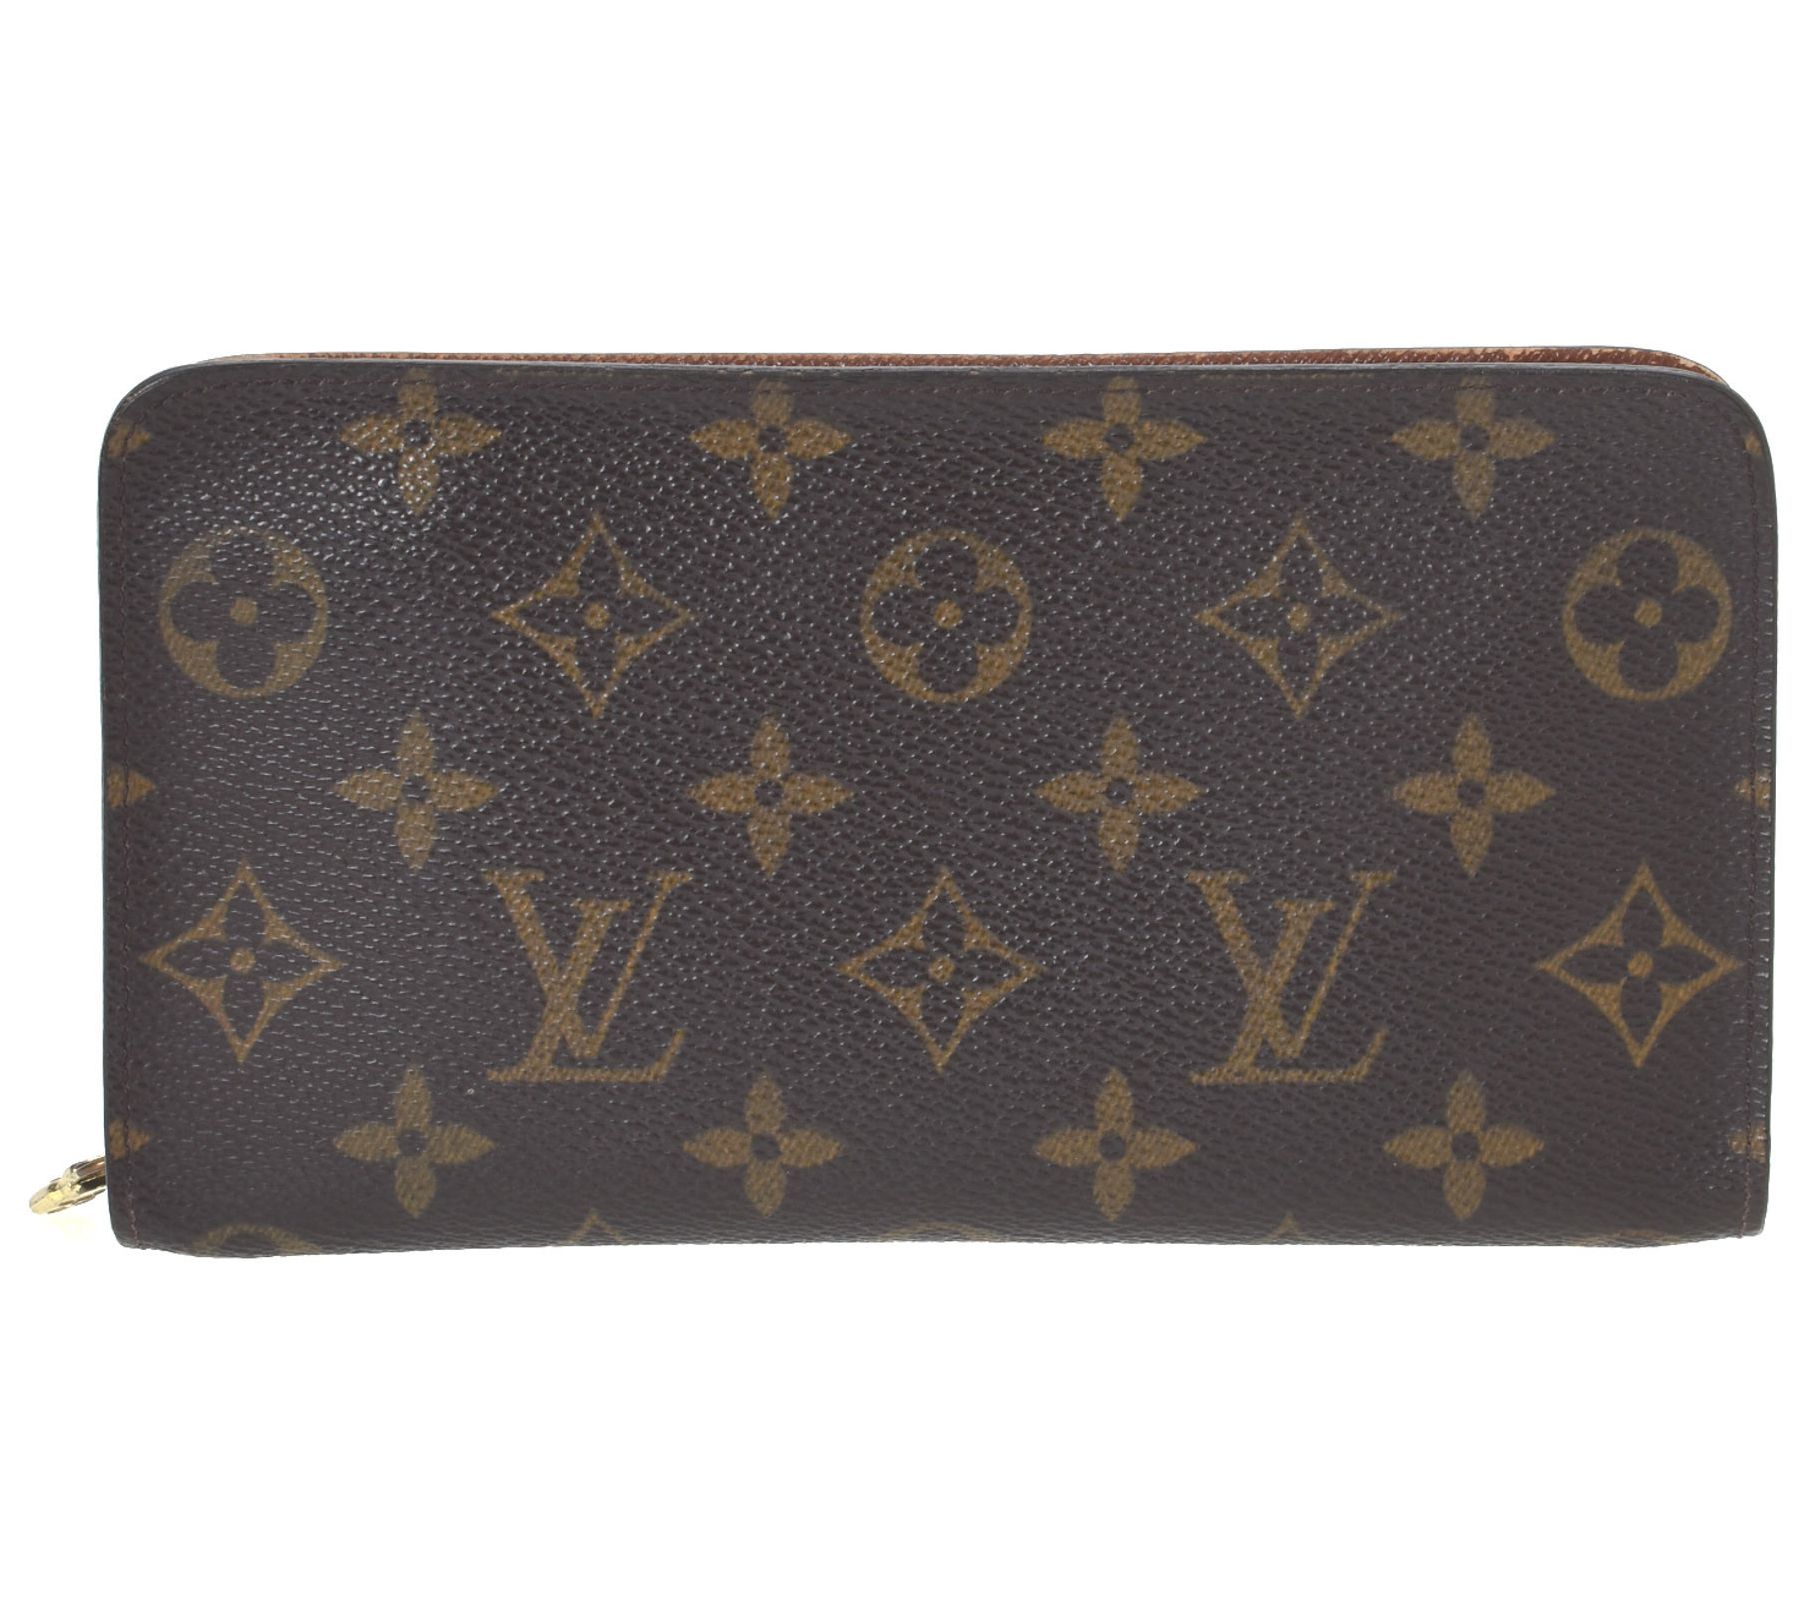 Authenticated Pre-Owned Louis Vuitton Zippy Organizer 